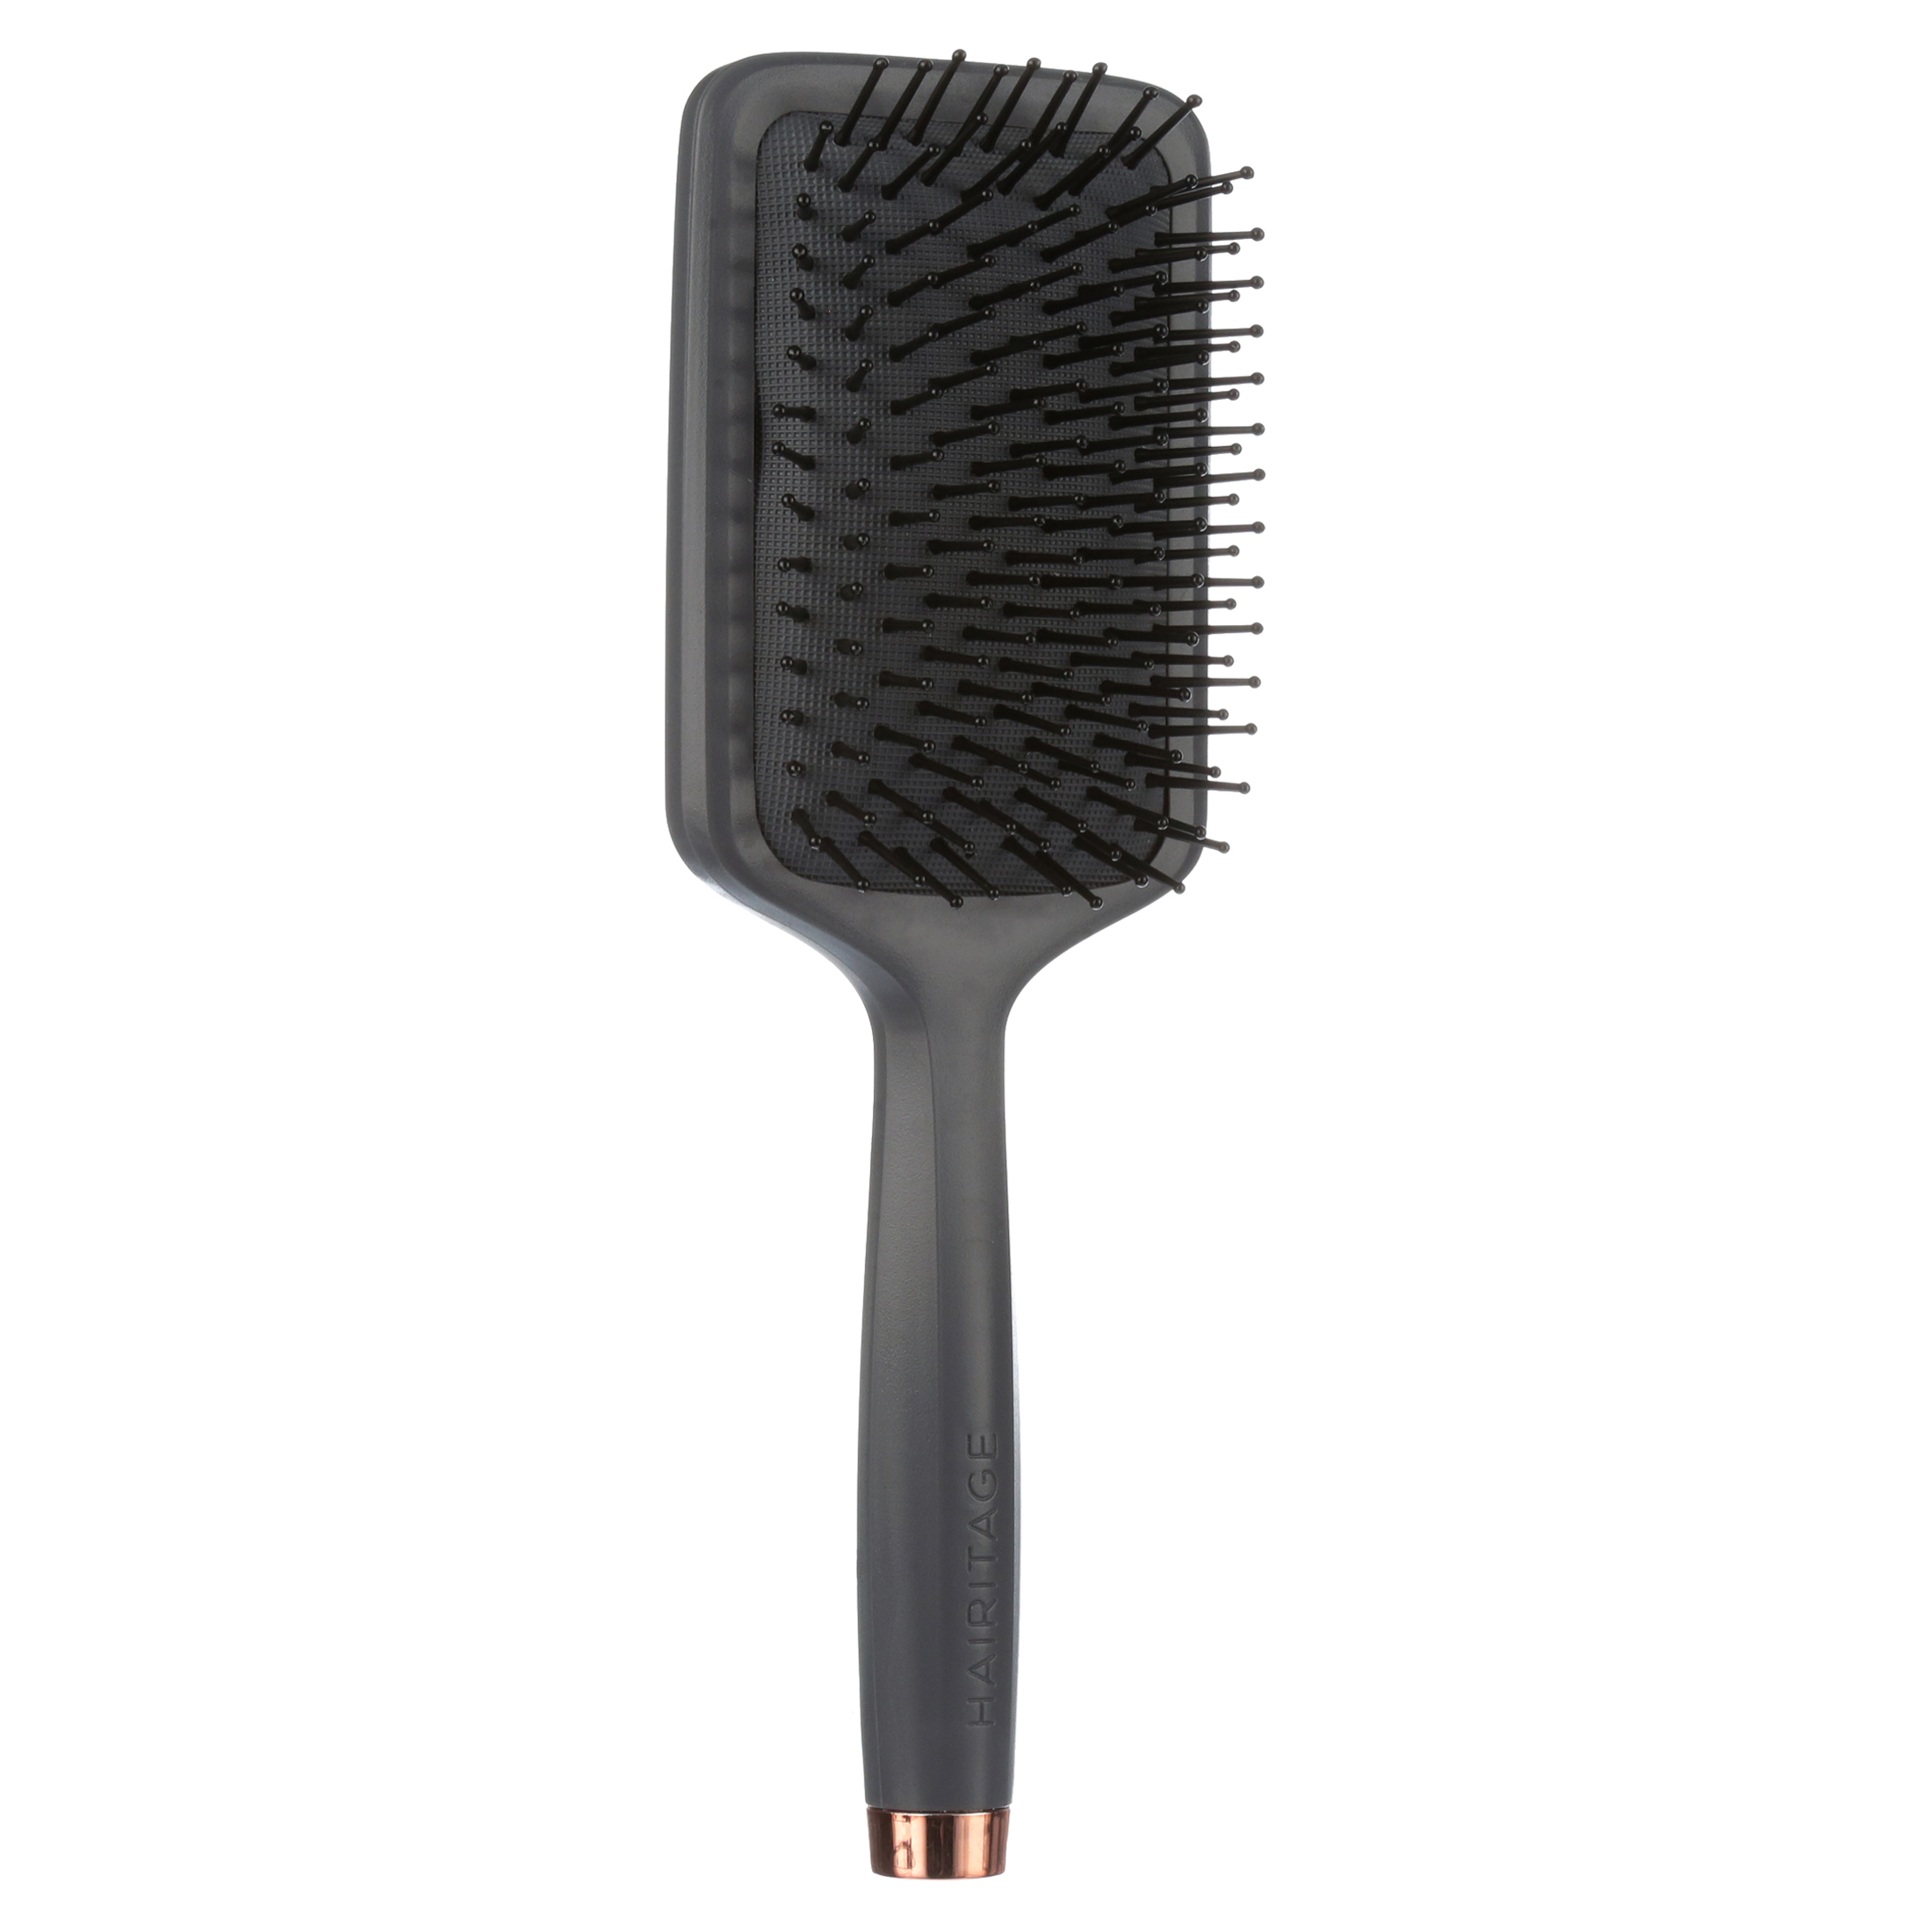 Hairitage Brush It Off Detangling & Smoothing Paddle Hair Brush for Women | Anti Frizz | for Wet & Dry Hair, 1 PC - image 9 of 12